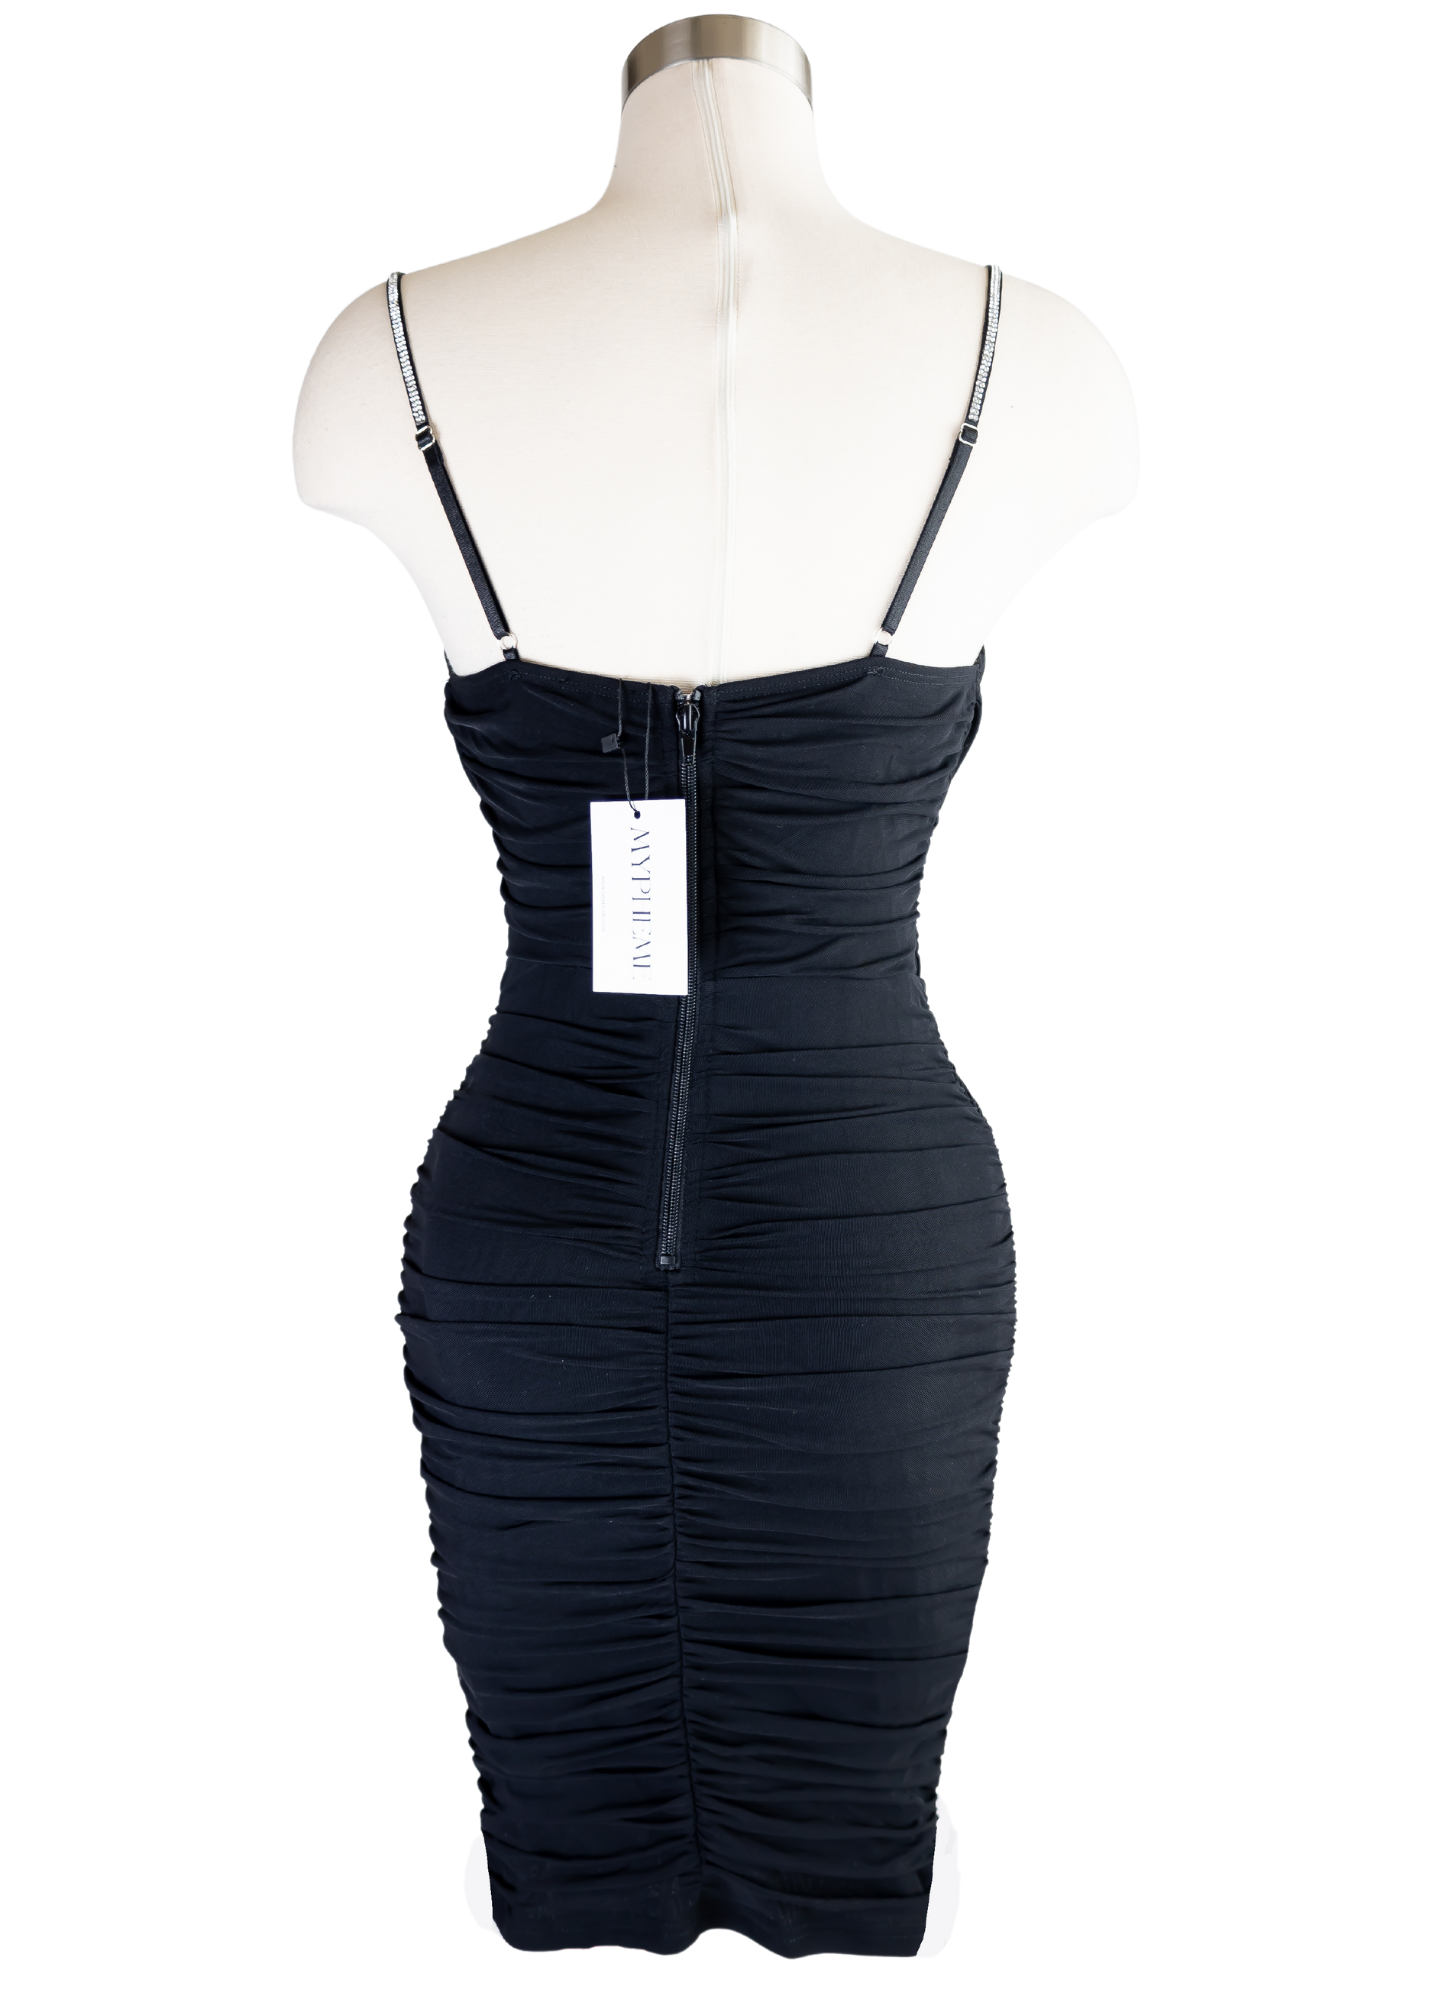 The Casey midi dress is the epitome of sophisticated glamor. It has adjustable shoulder straps, a zipper at the back, and underwire cups. Casey dress has a tight cut for a bodycon fit with draped skirt